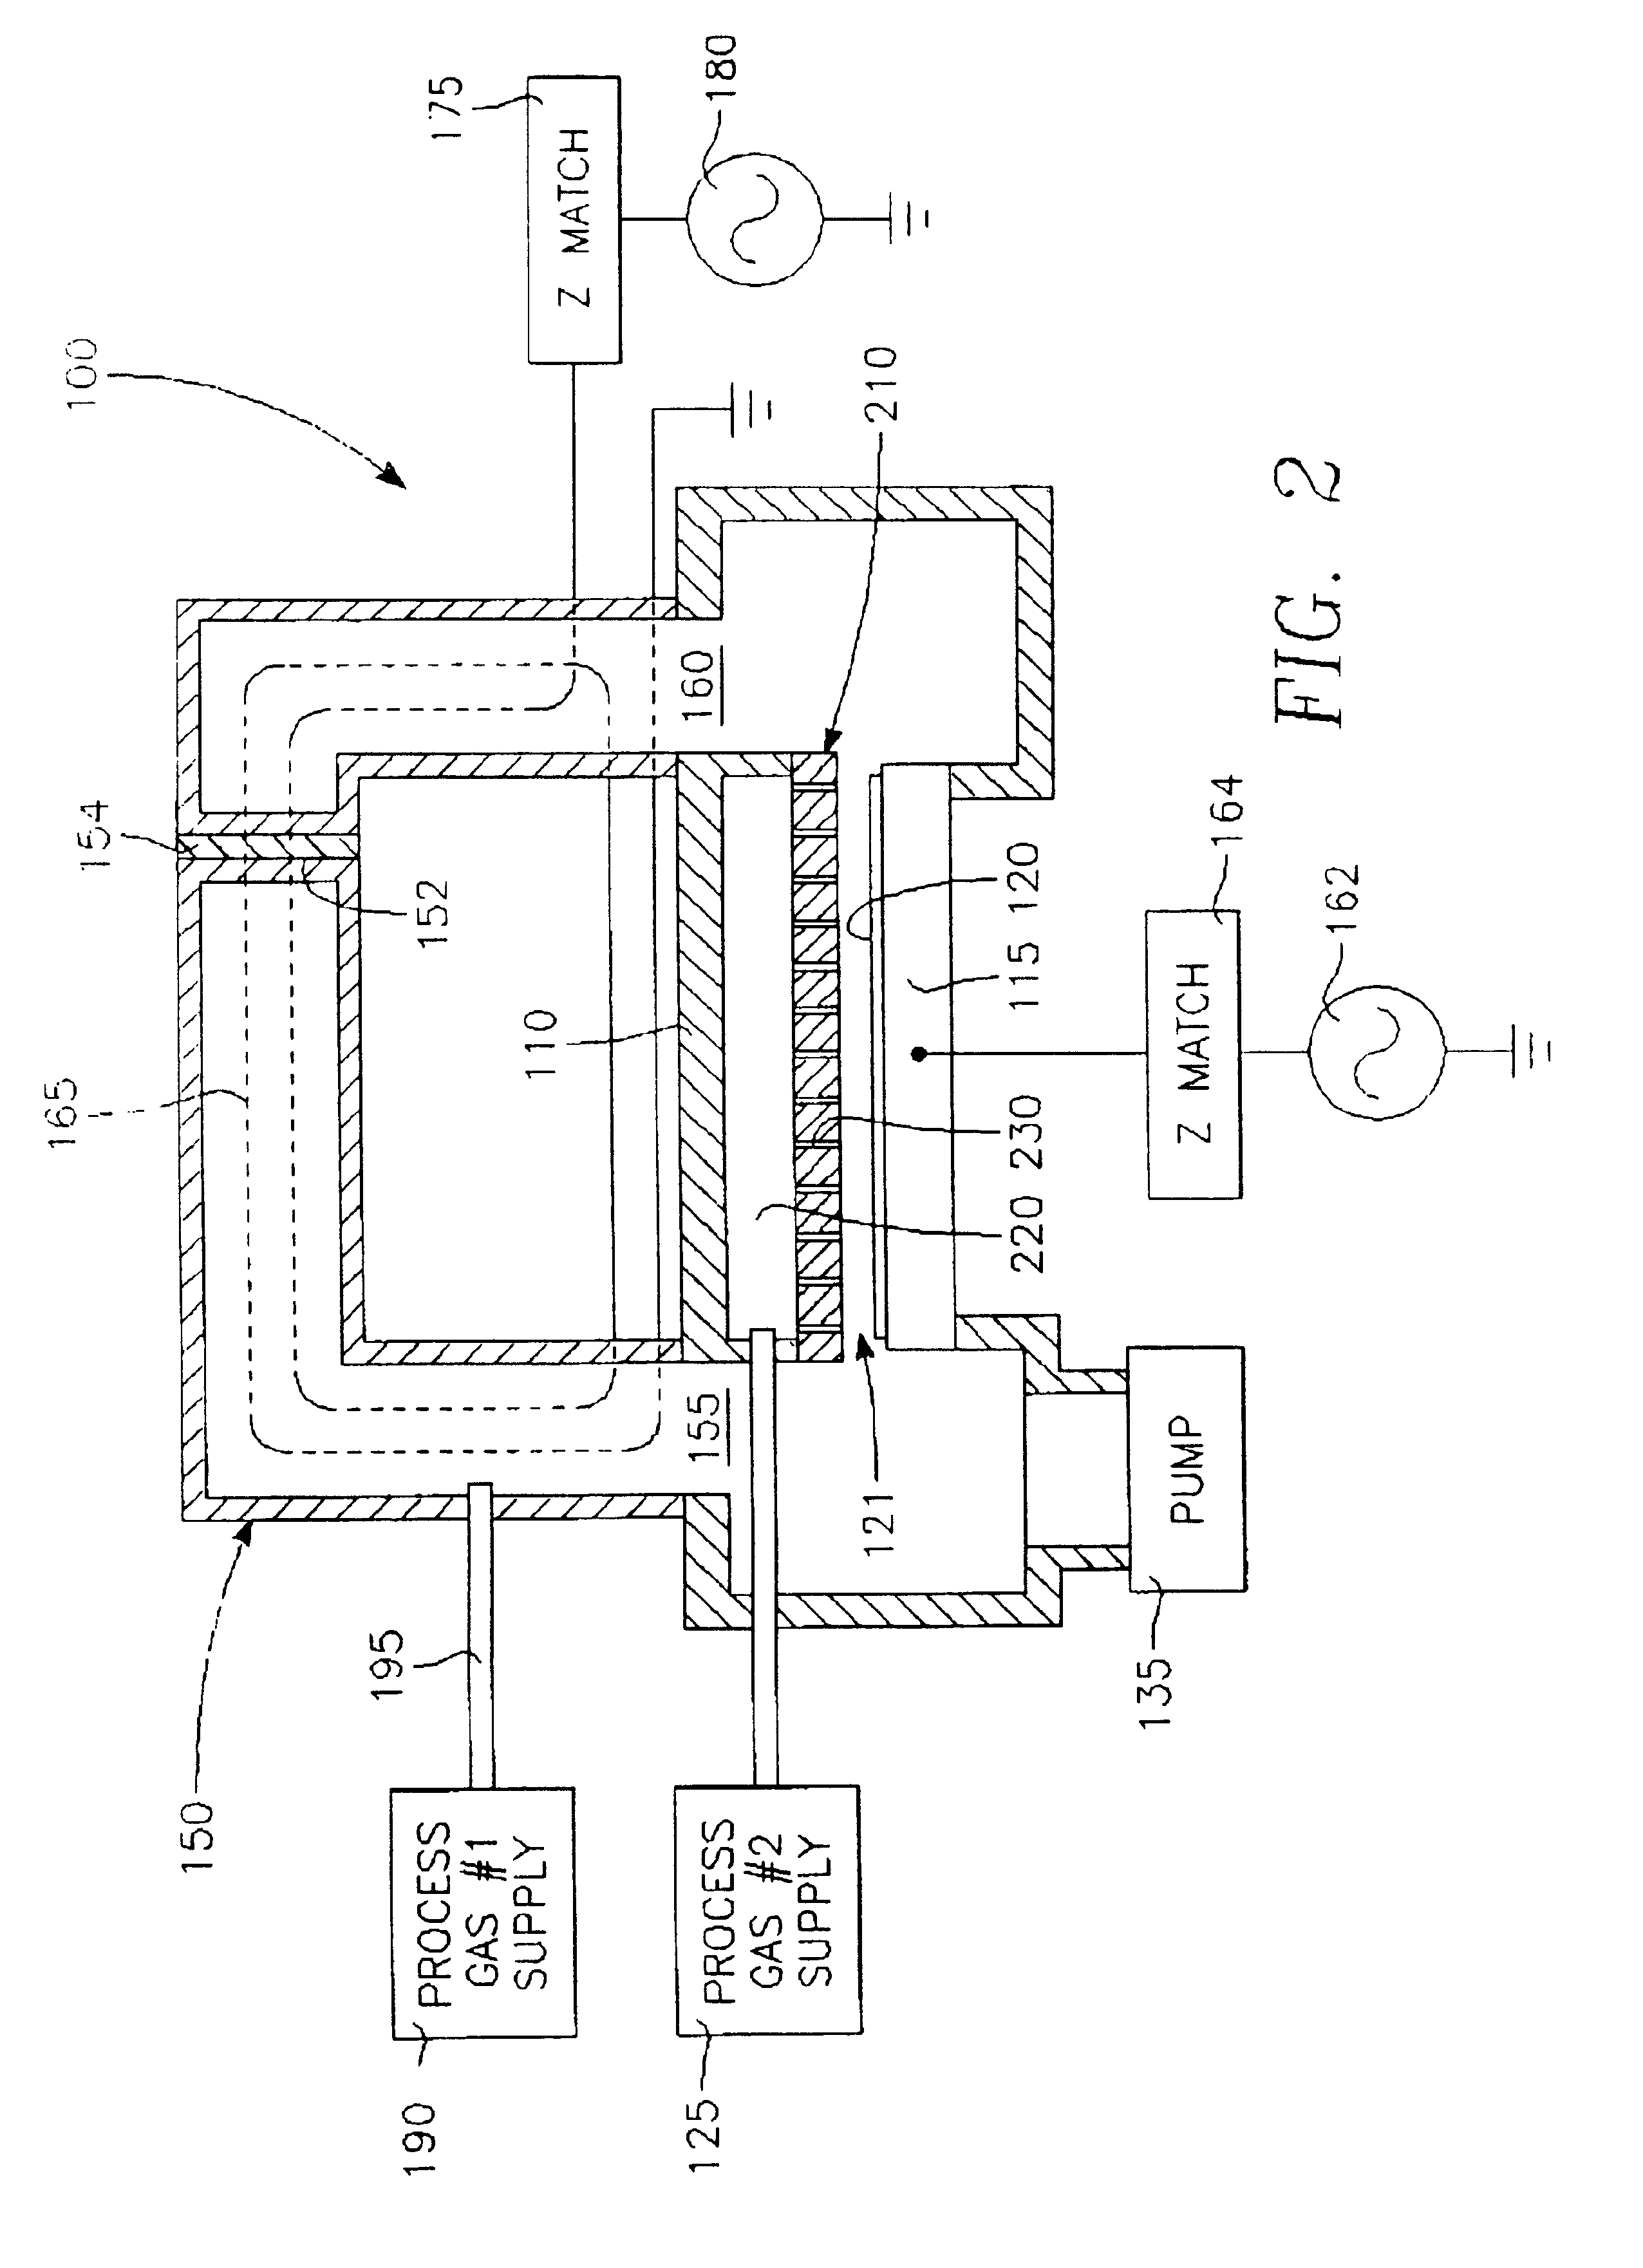 Method of processing a workpiece using an externally excited torroidal plasma source